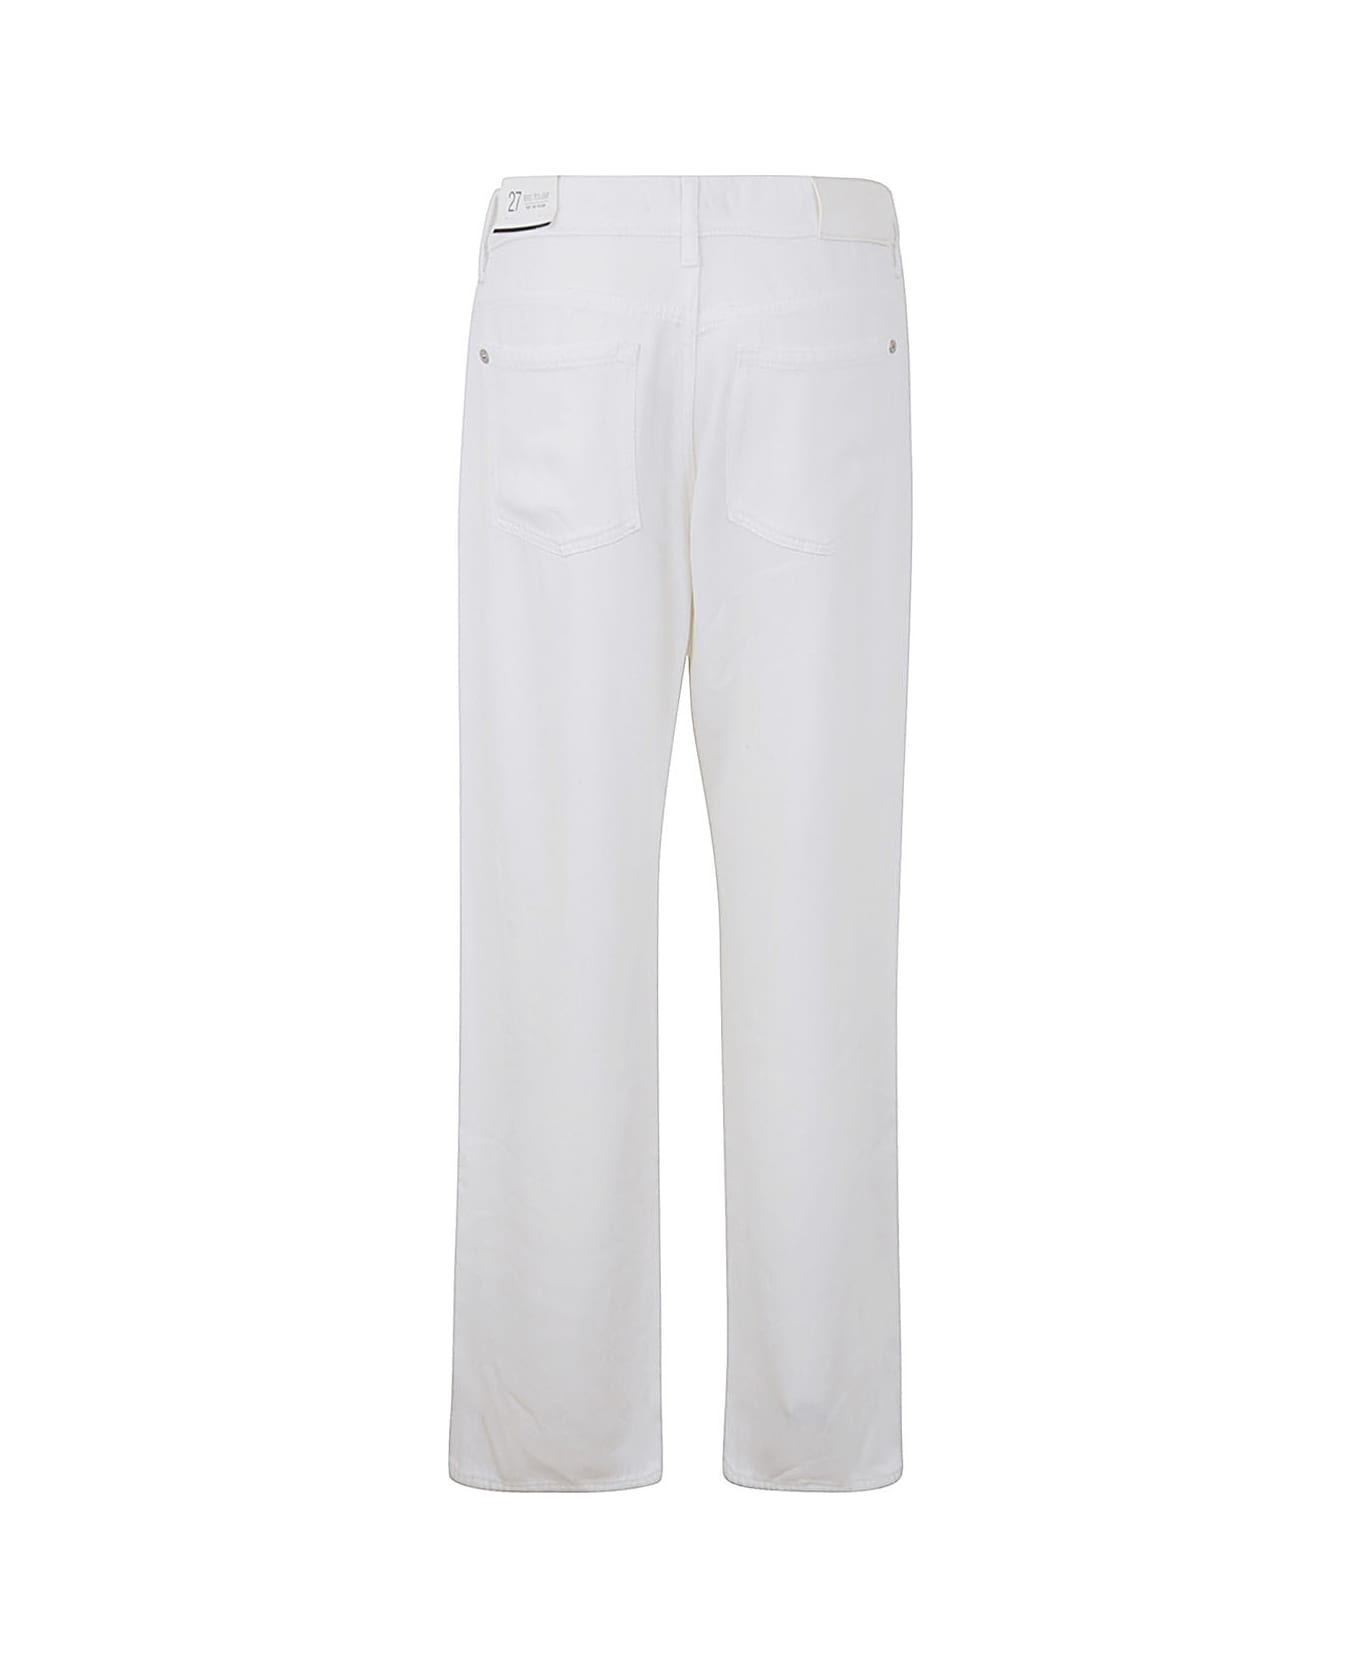 7 For All Mankind Tess Trouser Colored Tencel - White ボトムス